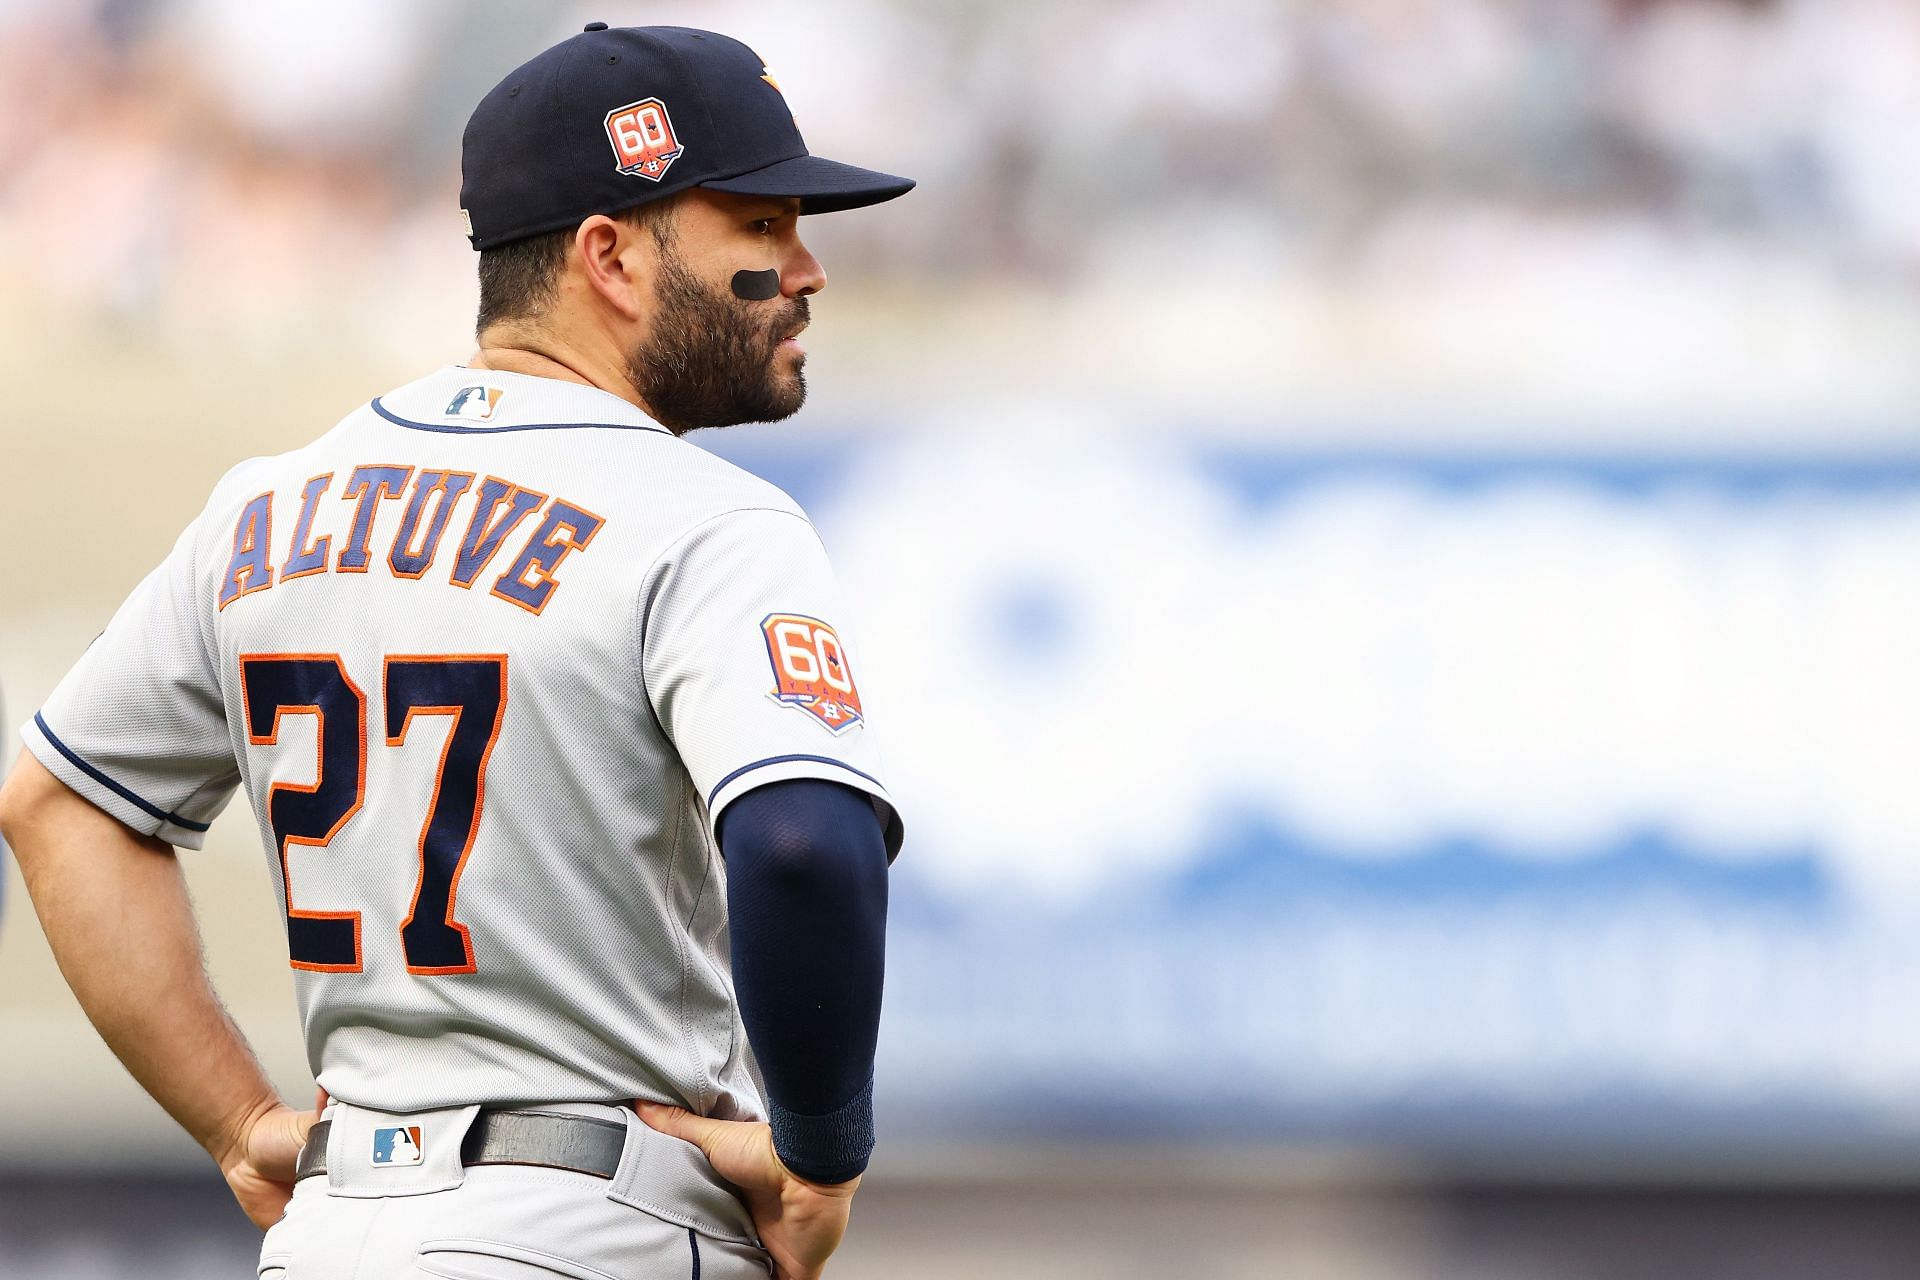 Houston Astros star Jose Altuve made a sneaky play against the Angels.